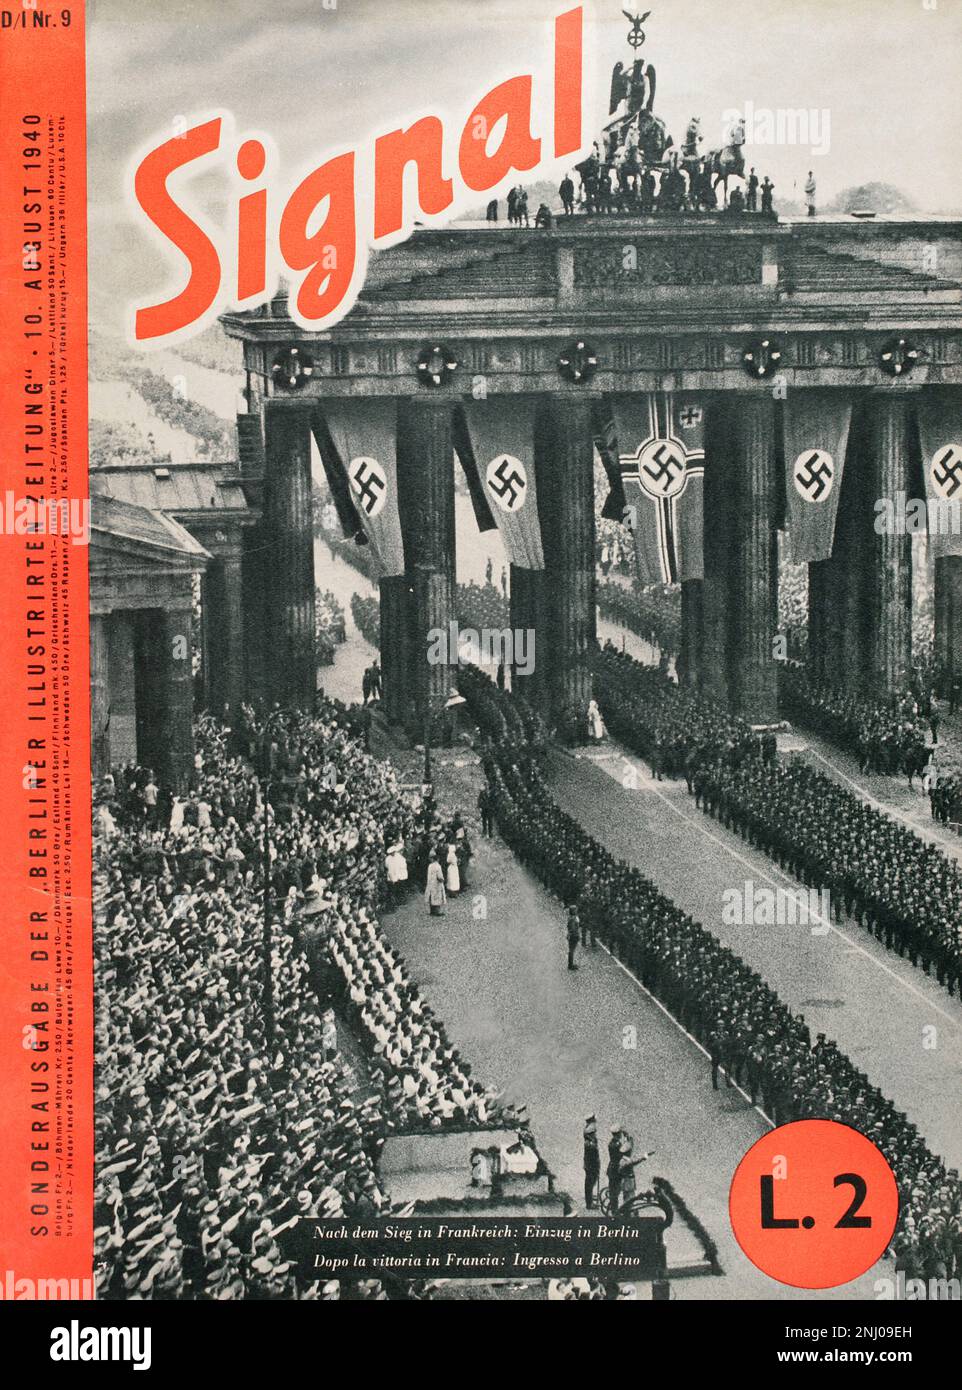 History of Germany. 'Signal' magazine. Cover of issue number 9 (10 August 1940) of the German-Italian edition, showing a photograph of German troops entering Berlin after their victory in France. After the victory in France: entry into Berlin. This magazine was published between April 1940 and April 1945 and was the main propaganda organ of the German army during World War II. Stock Photo